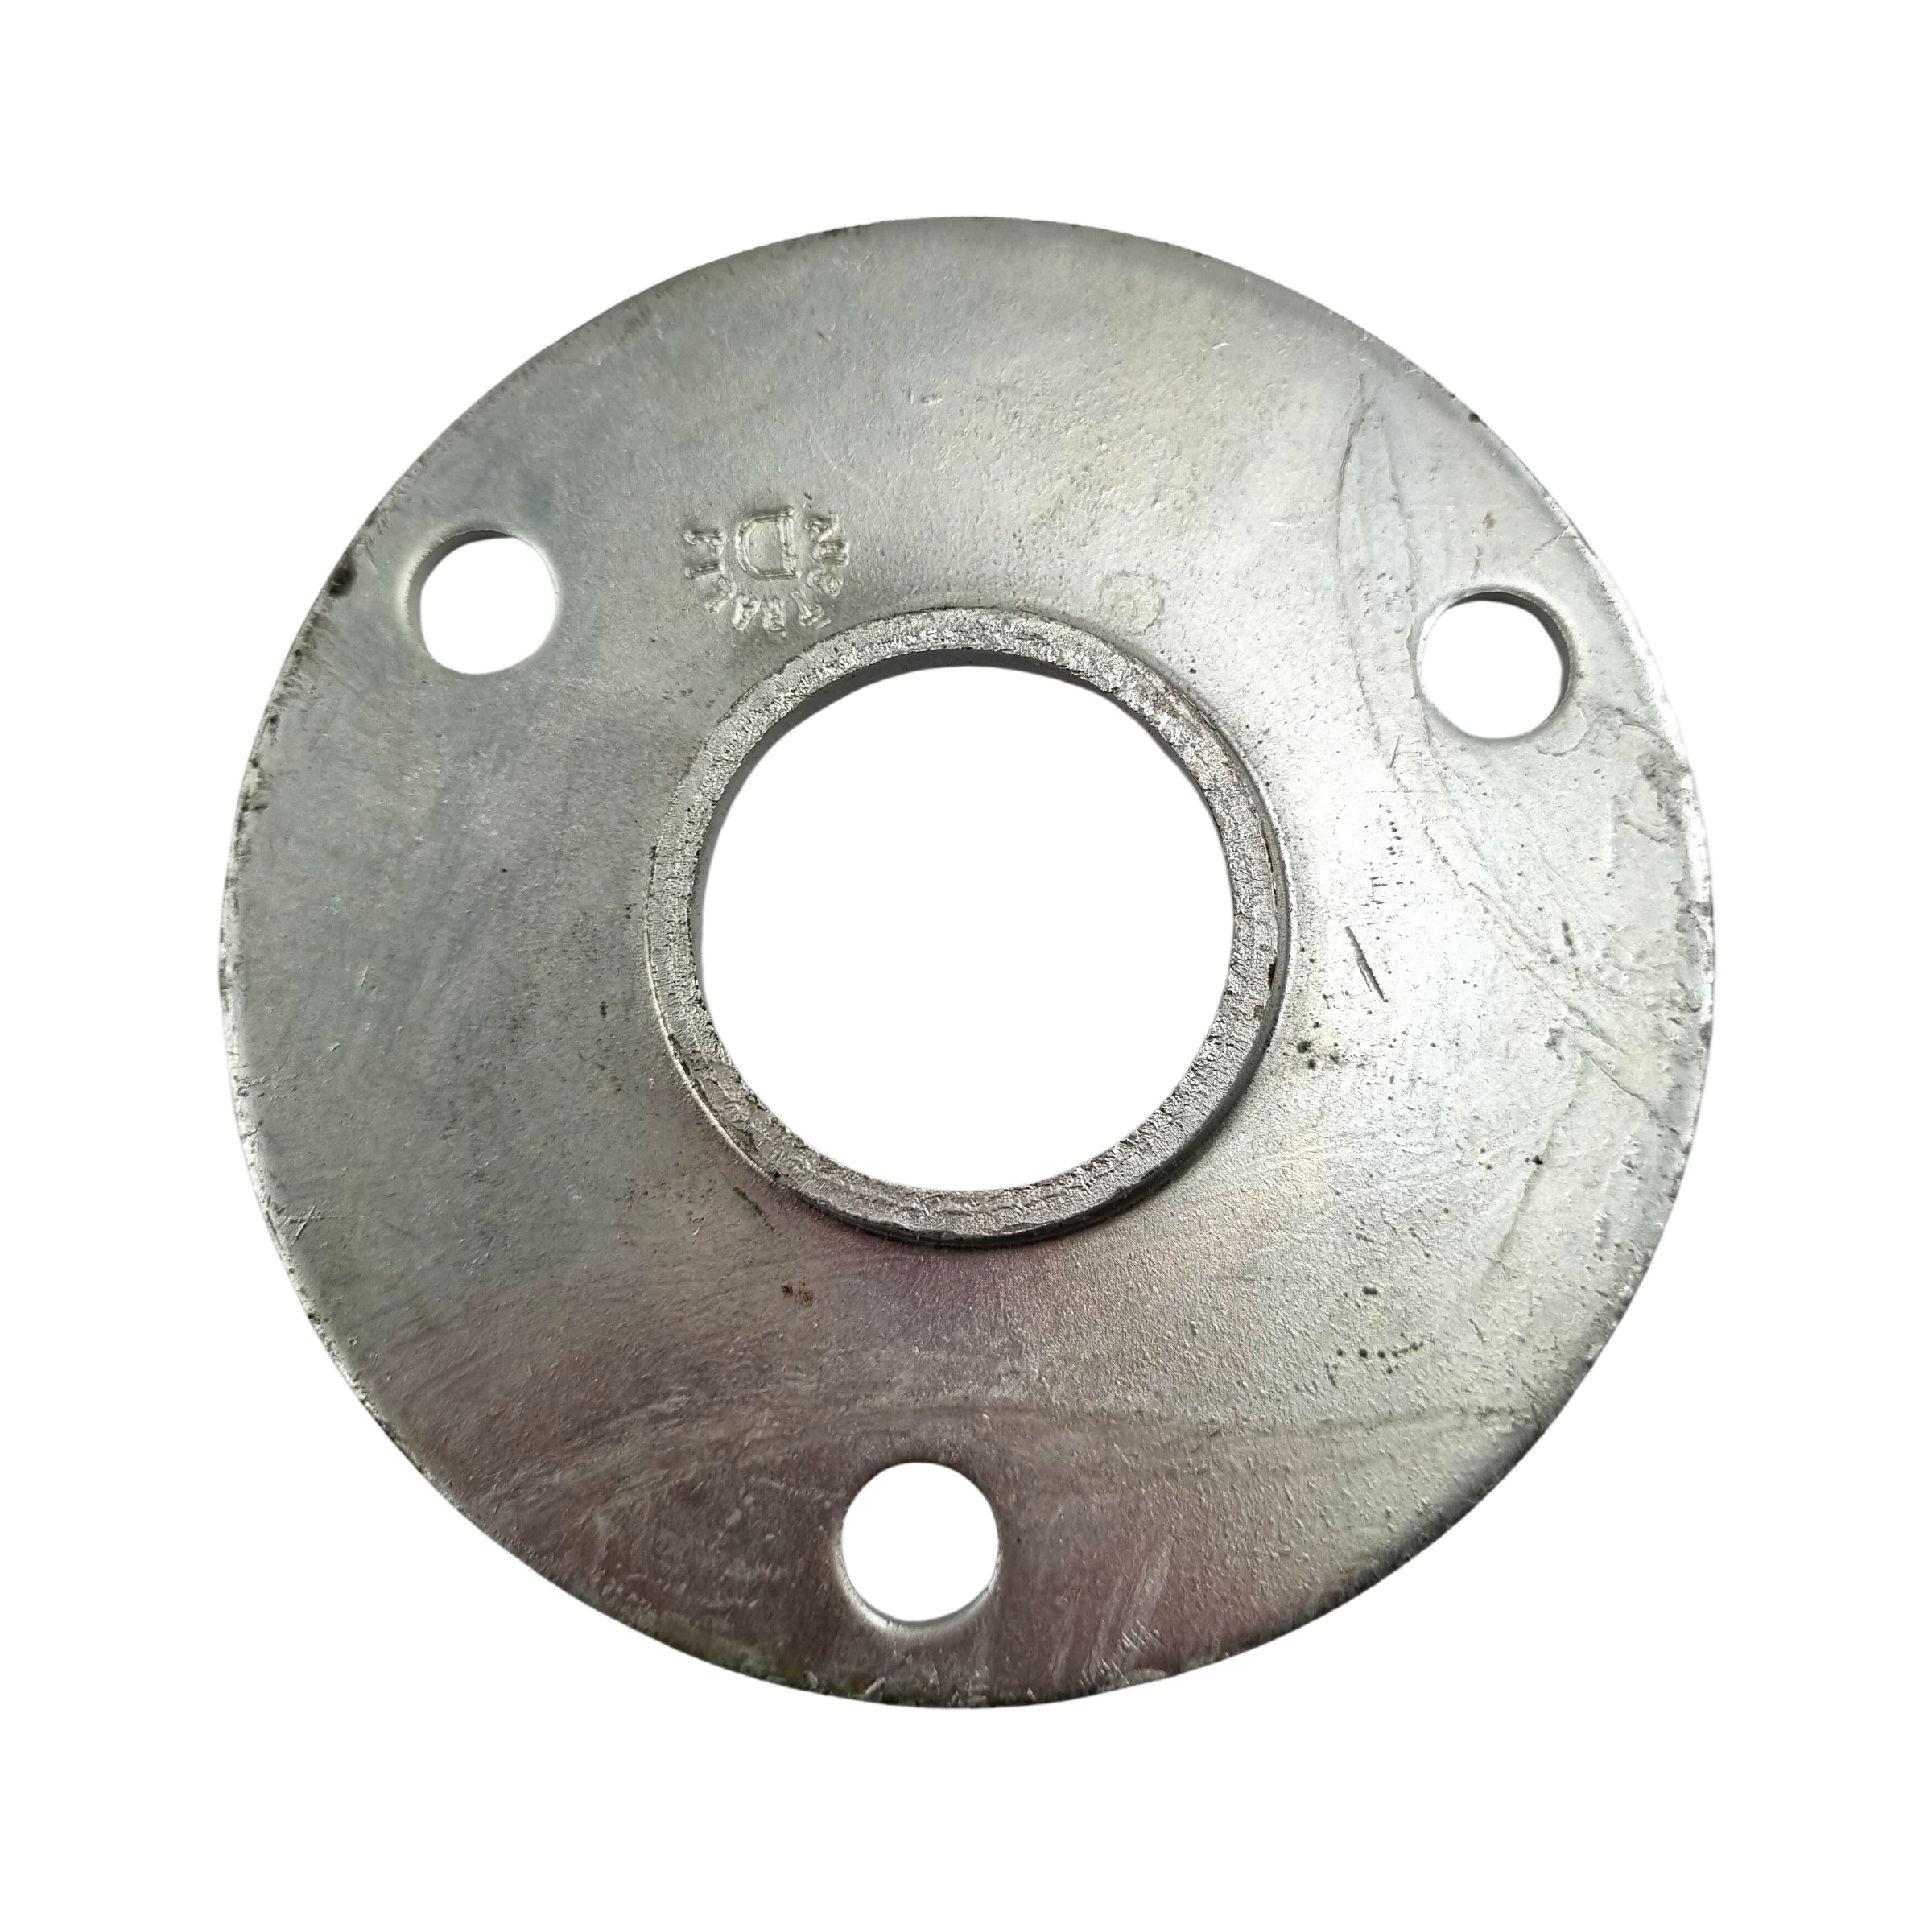 Round Flange - Galvanised. Australian made. Shop fence & gate fittings online chain.com.au. Australia wide shipping.